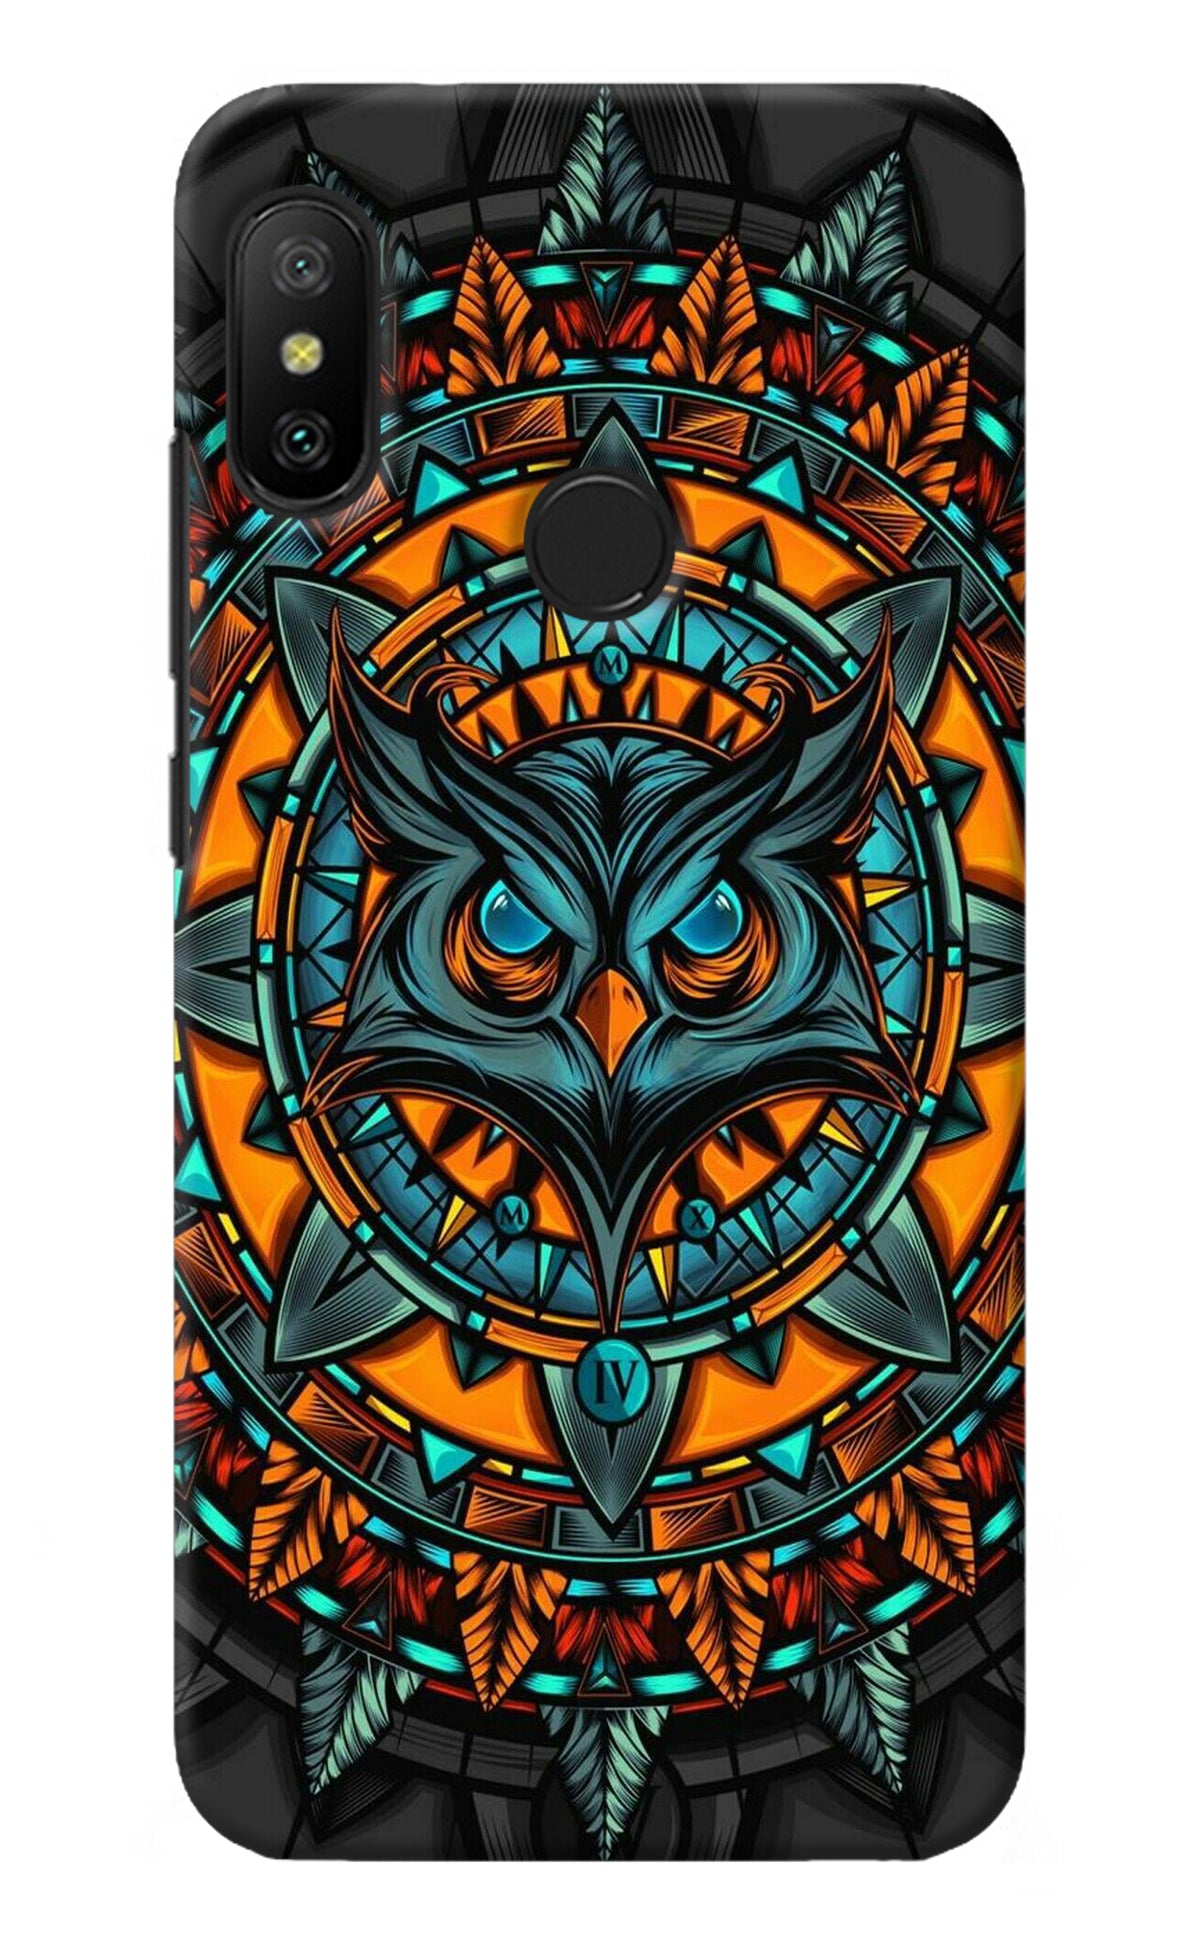 Angry Owl Art Redmi 6 Pro Back Cover